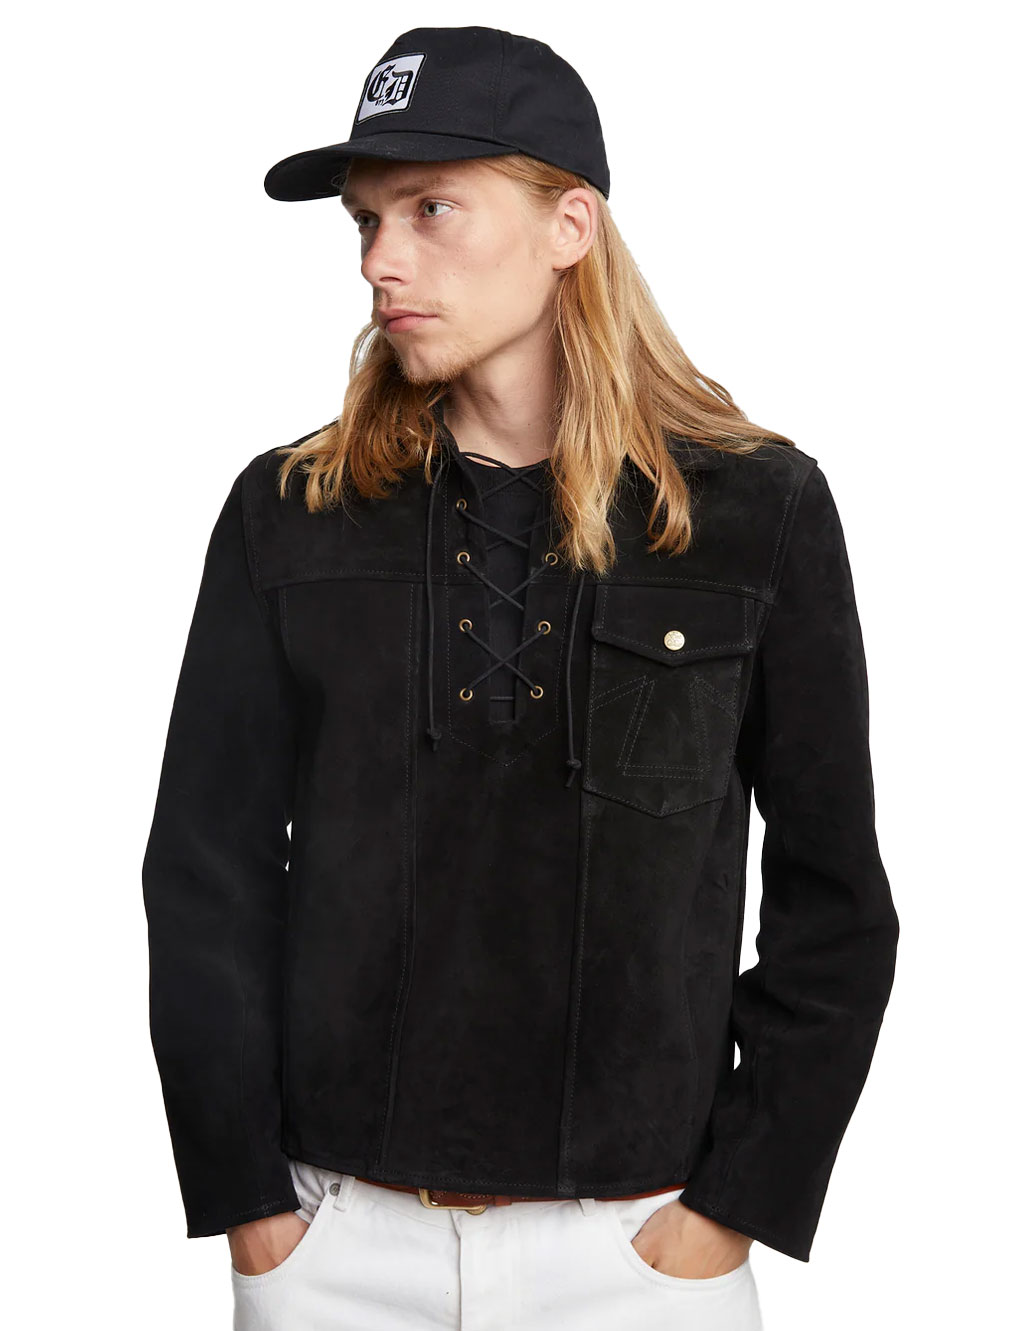 Eat Dust - Outlaw Leather Shirt - Black